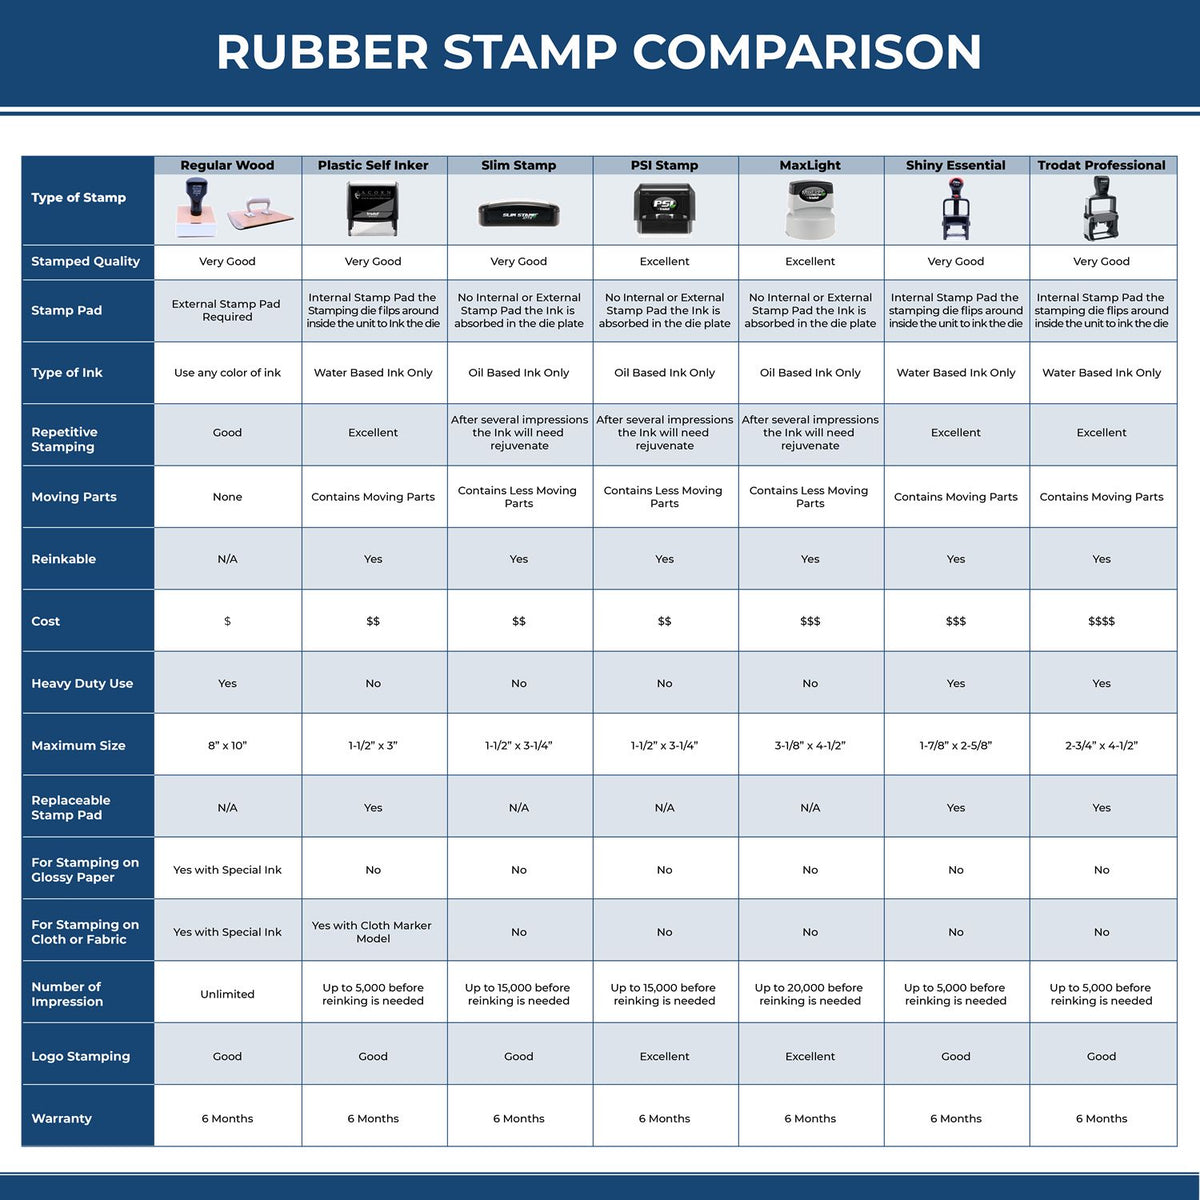 Large Self Inking Bc Bs Stamp 4547S Rubber Stamp Comparison